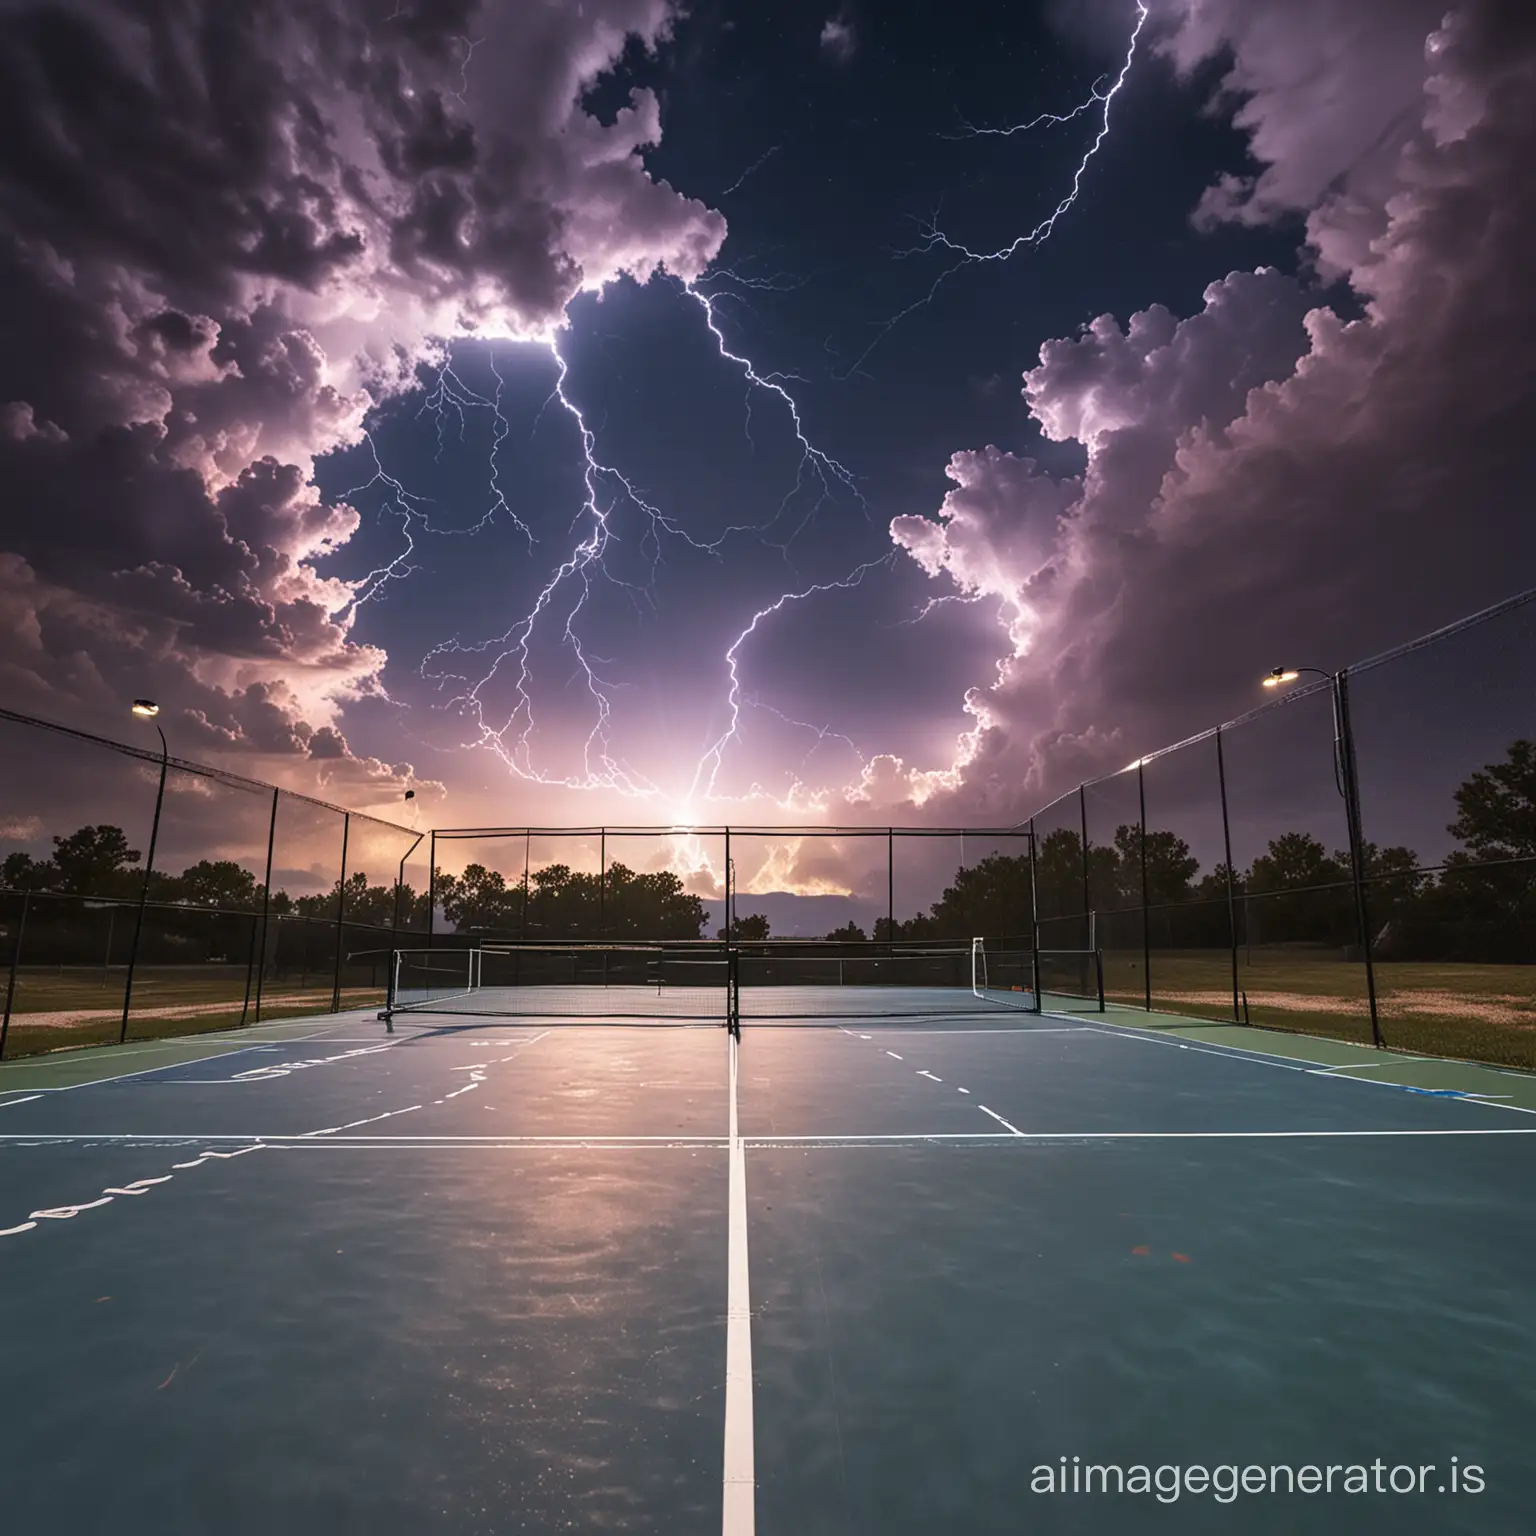 Outdoor-Pickleball-Match-under-Dramatic-Cloudy-Sky-with-Lightning